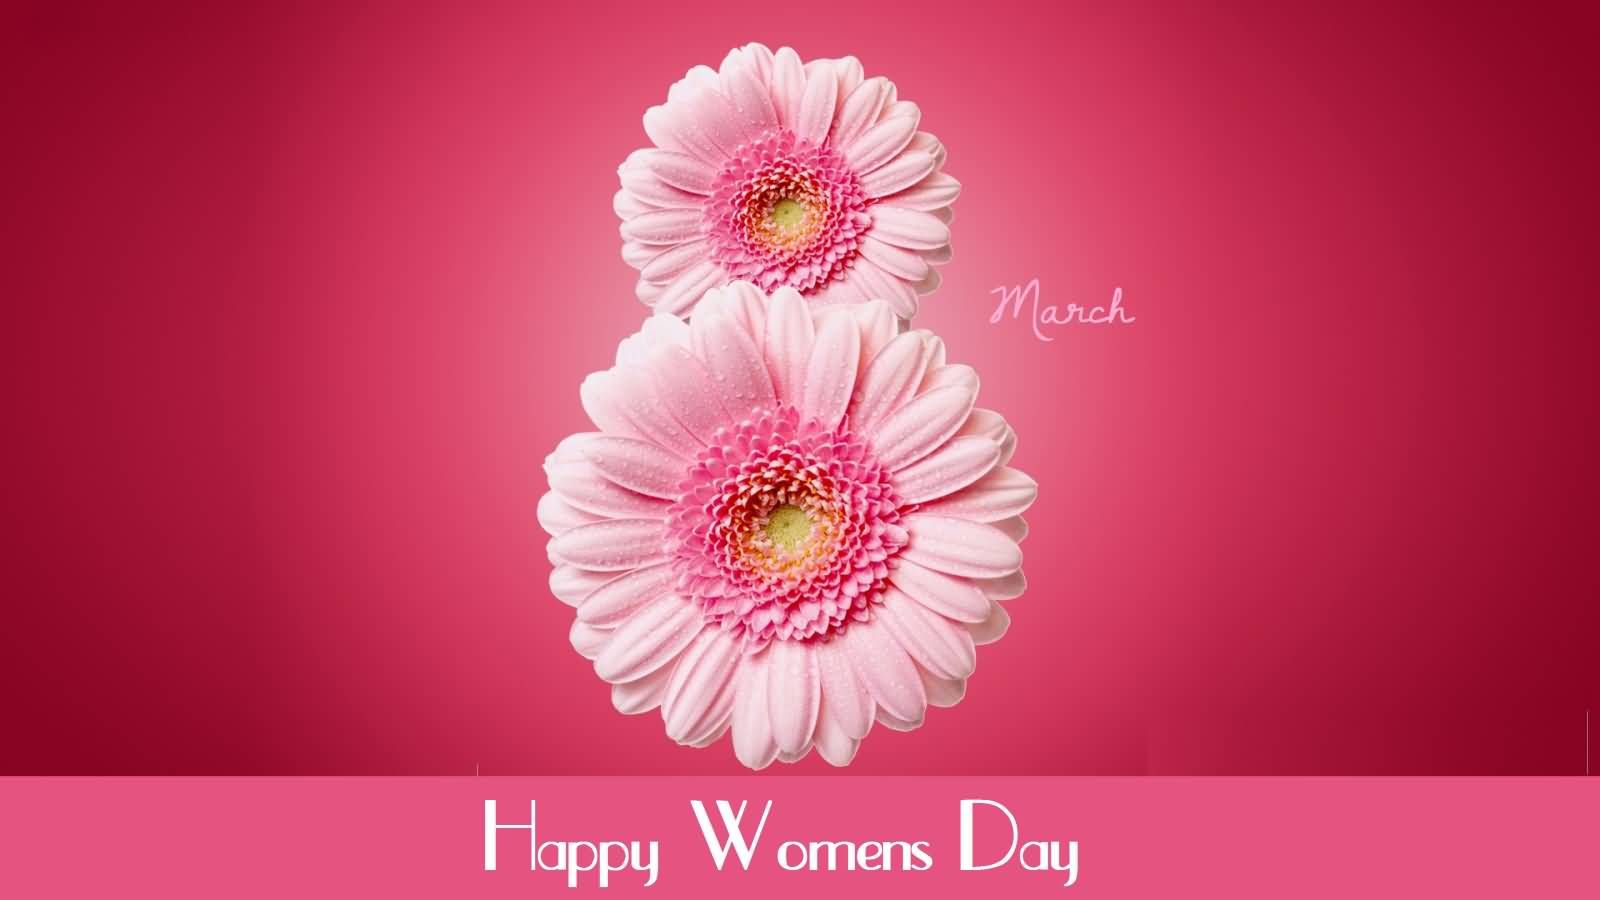 8 March Happy Women's Day Beautiful Card